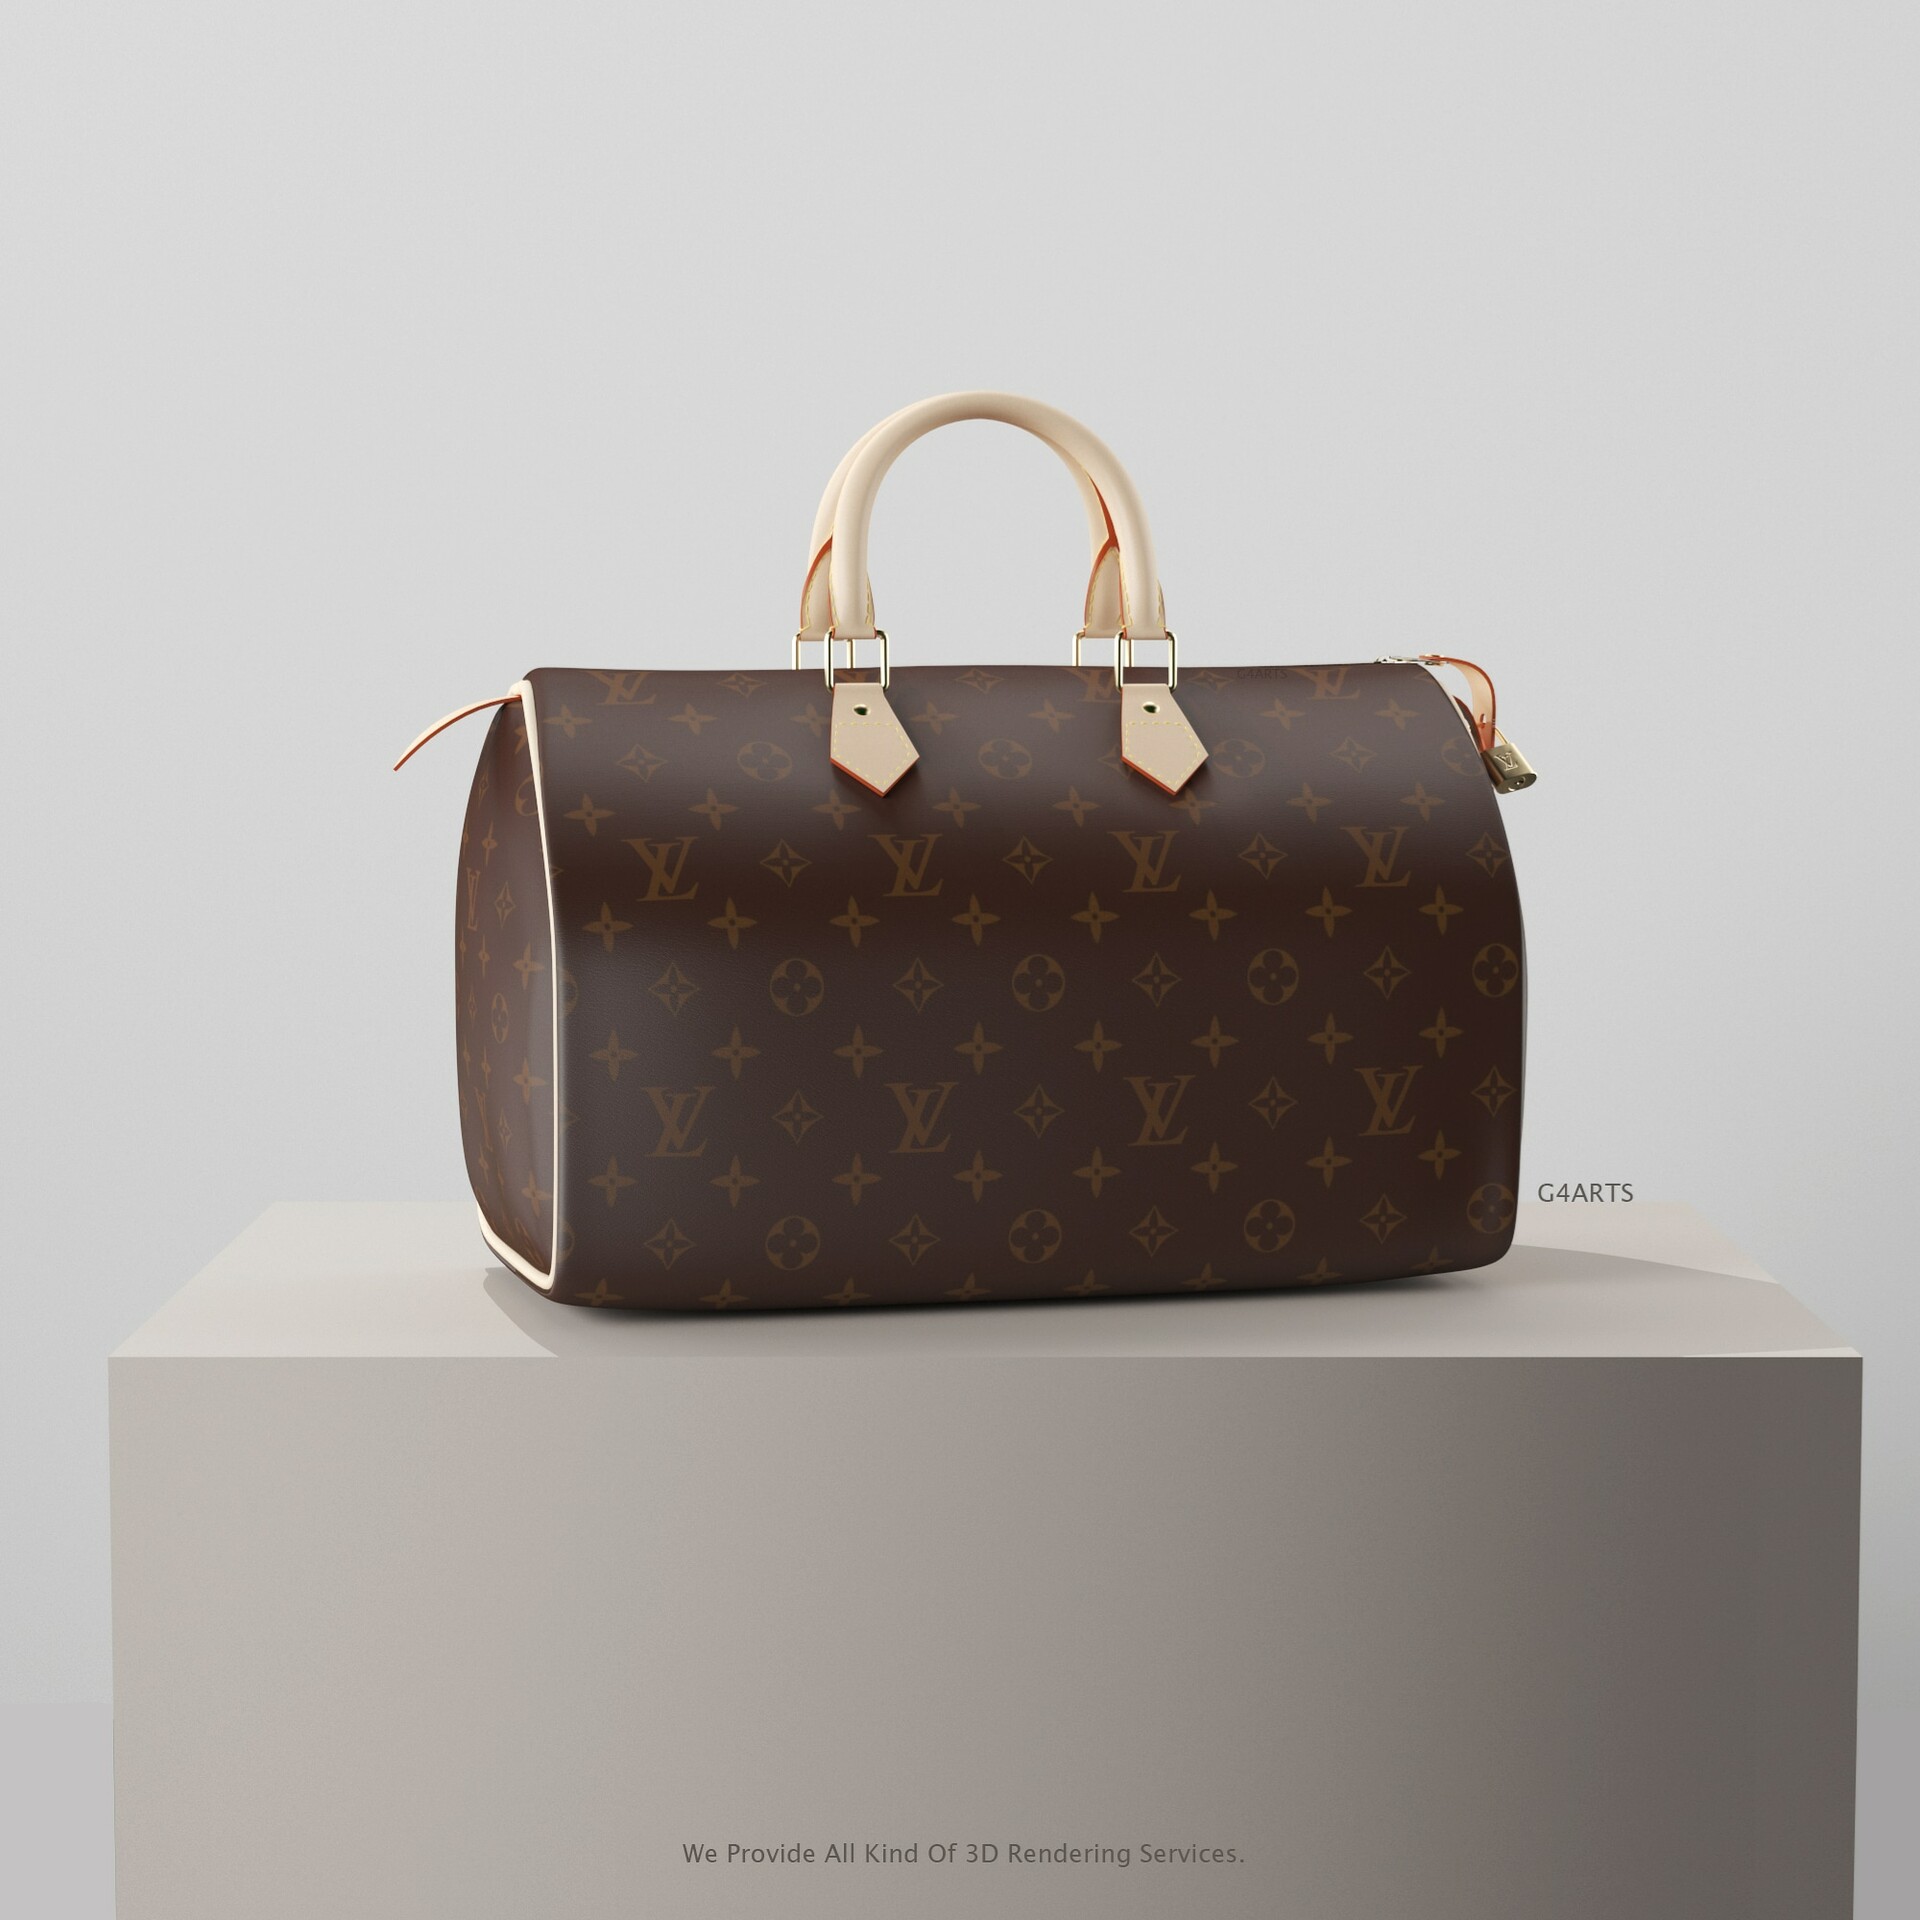 124 Louis Vuitton Gift Bag Images, Stock Photos, 3D objects